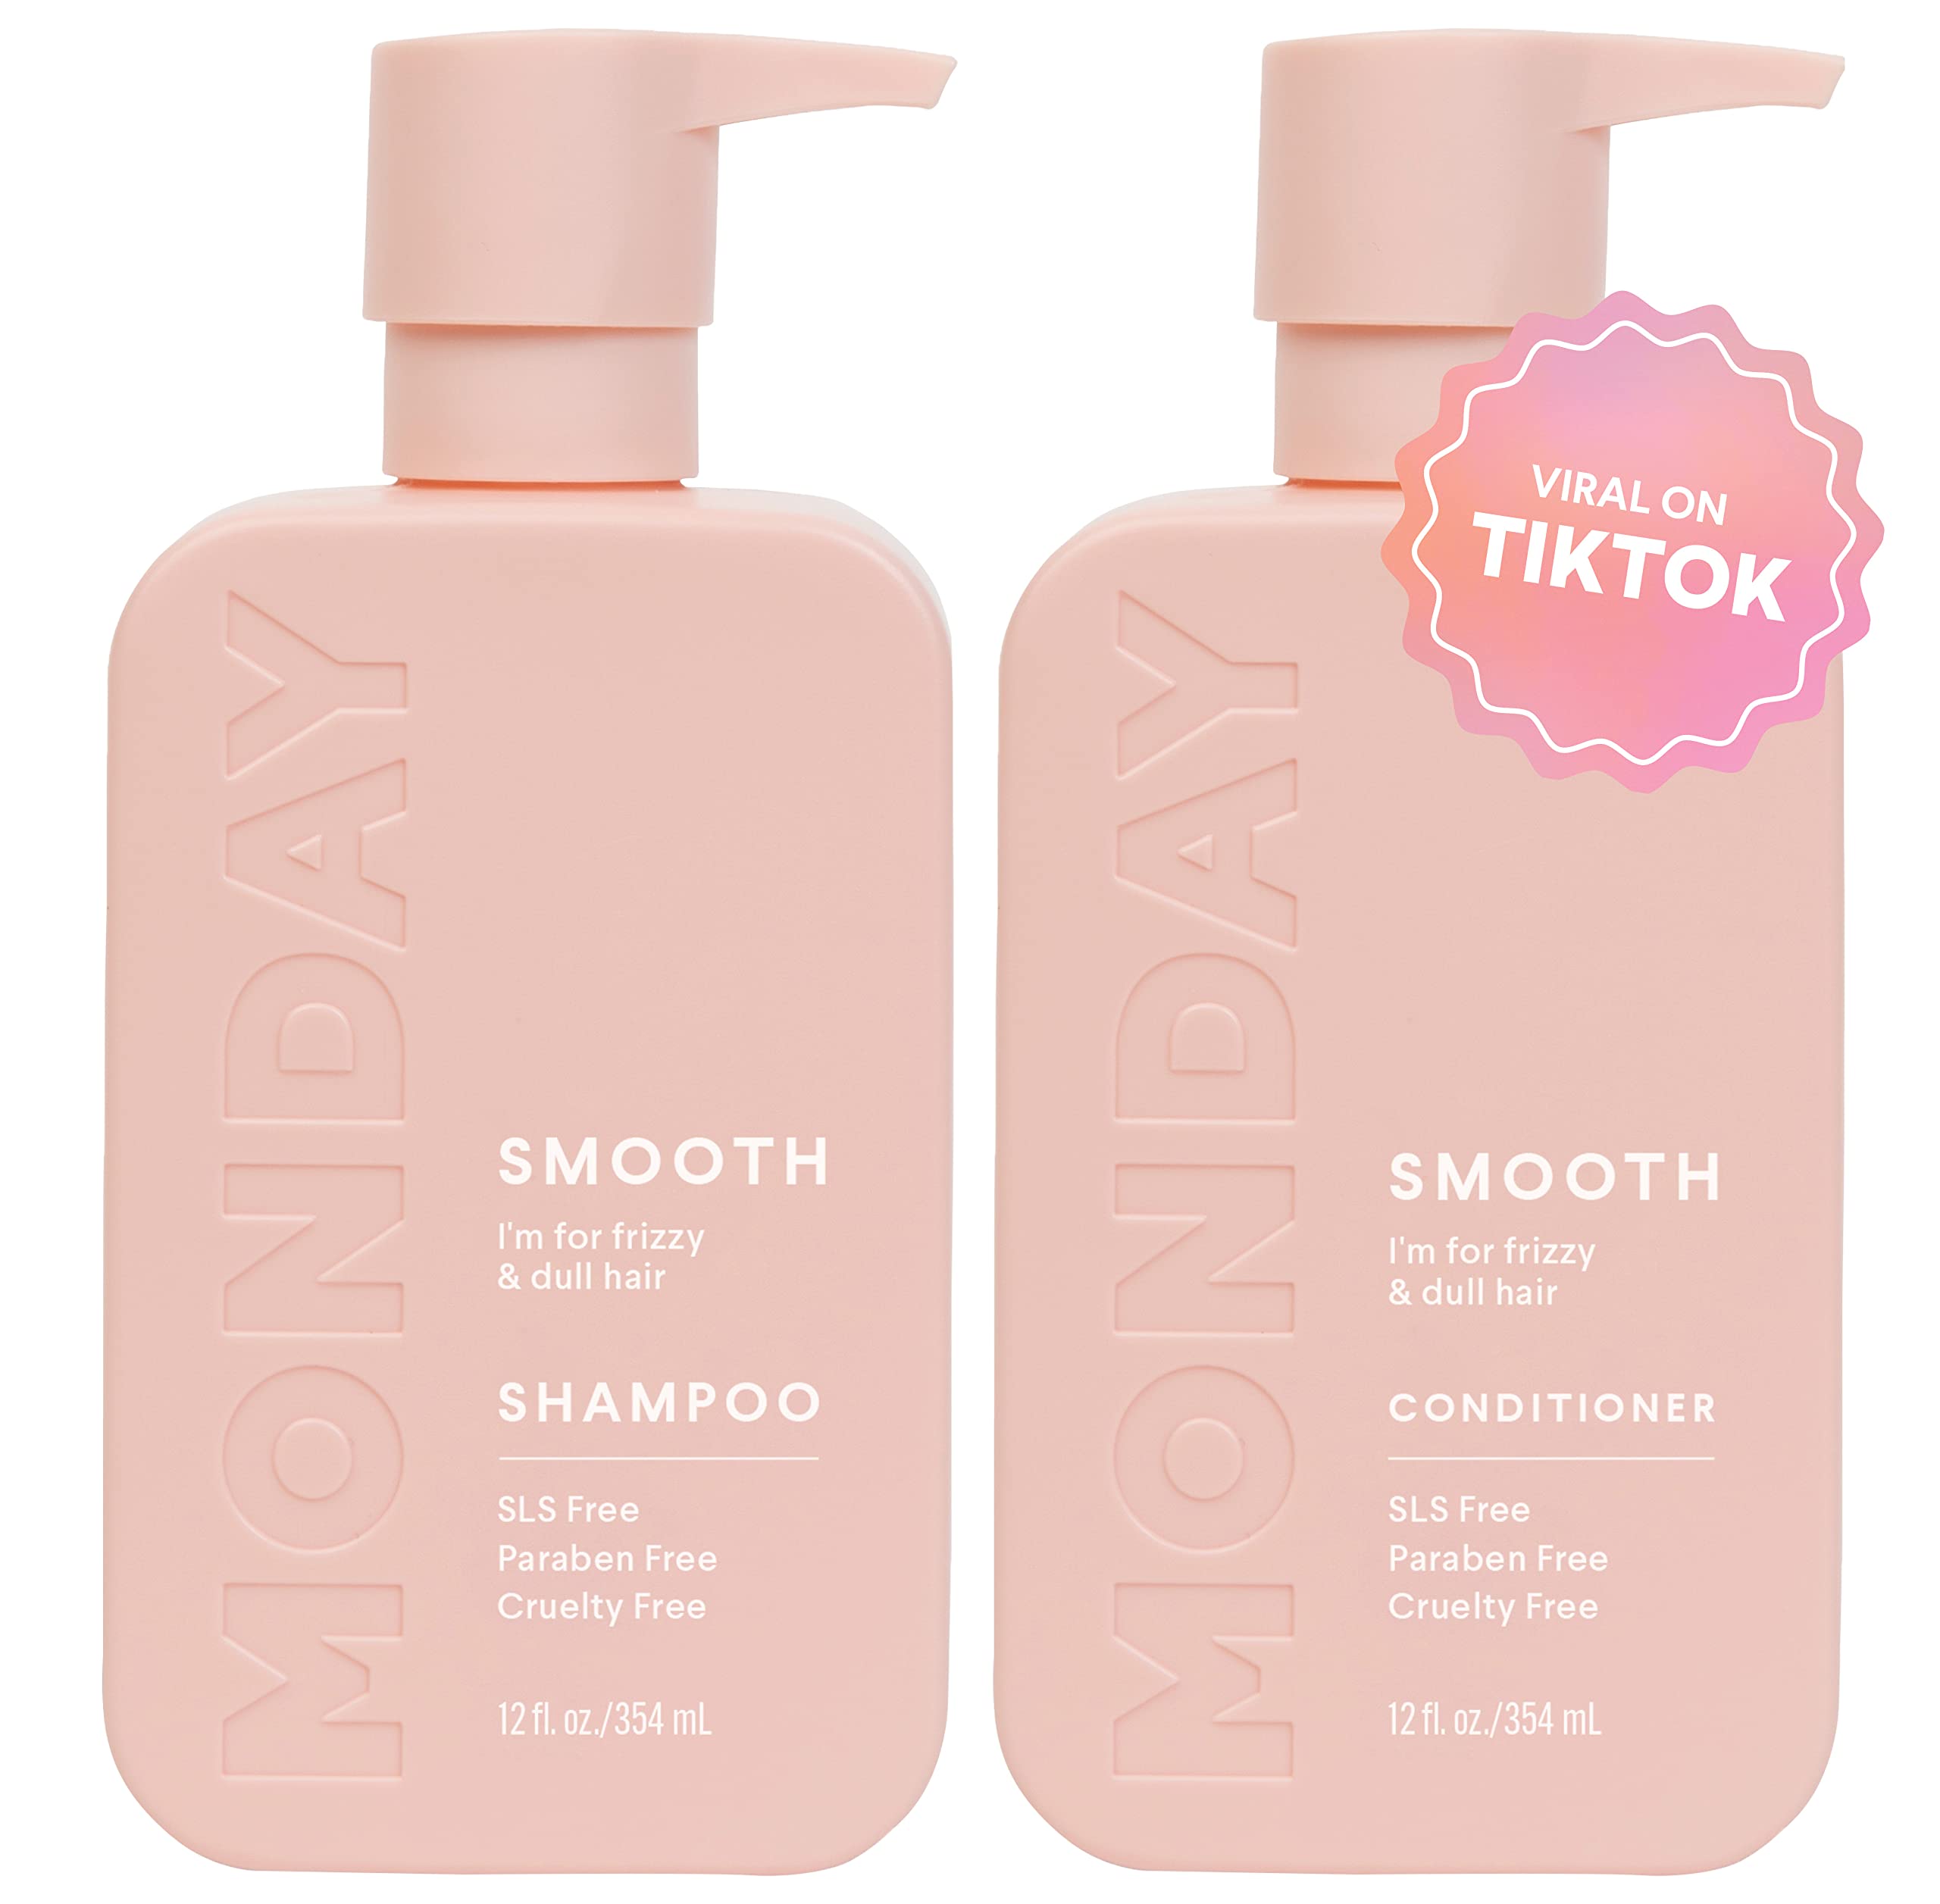 shampoo and conditioner for oily hair